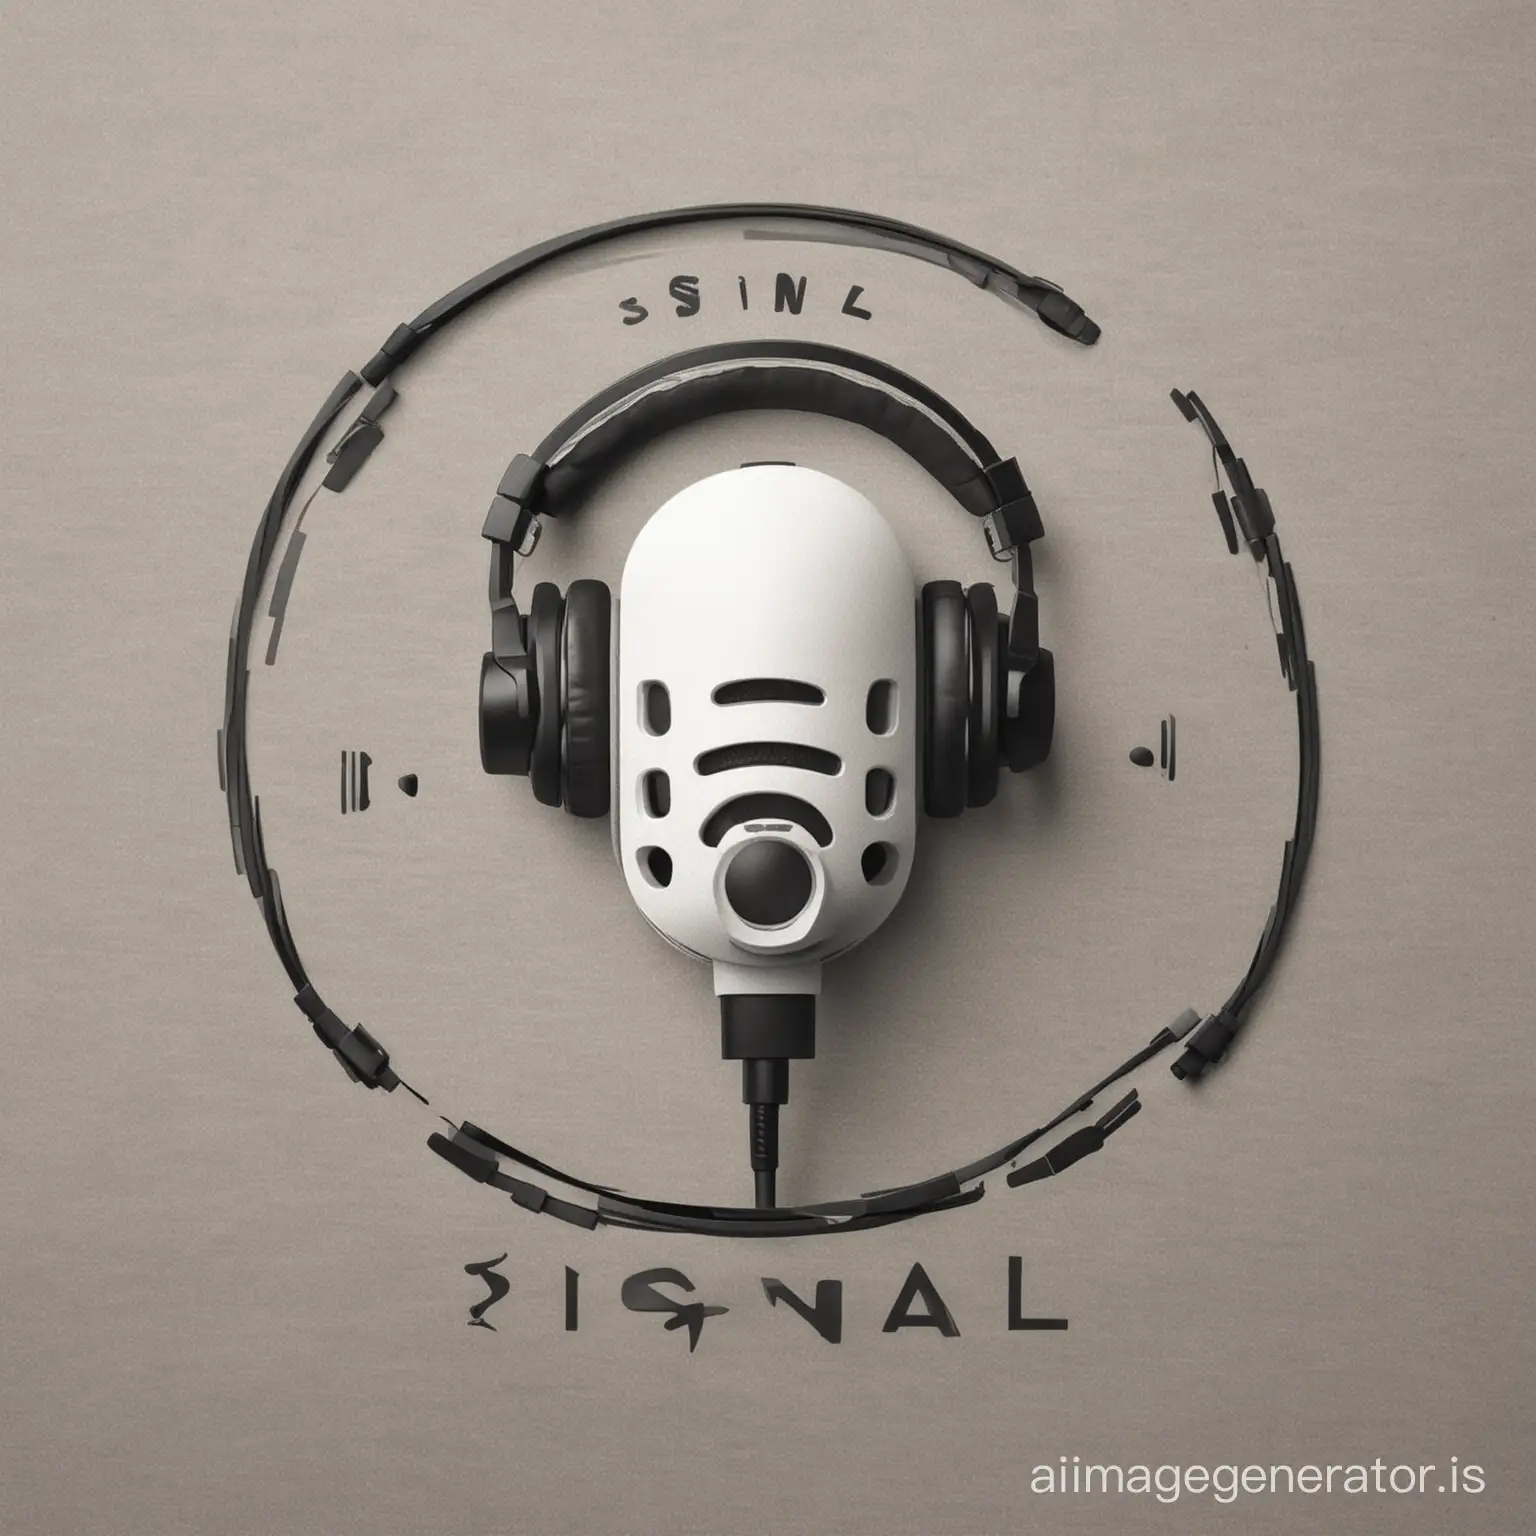 Logo of the recording studio "Signal" with a microphone and headphones in minimalist style